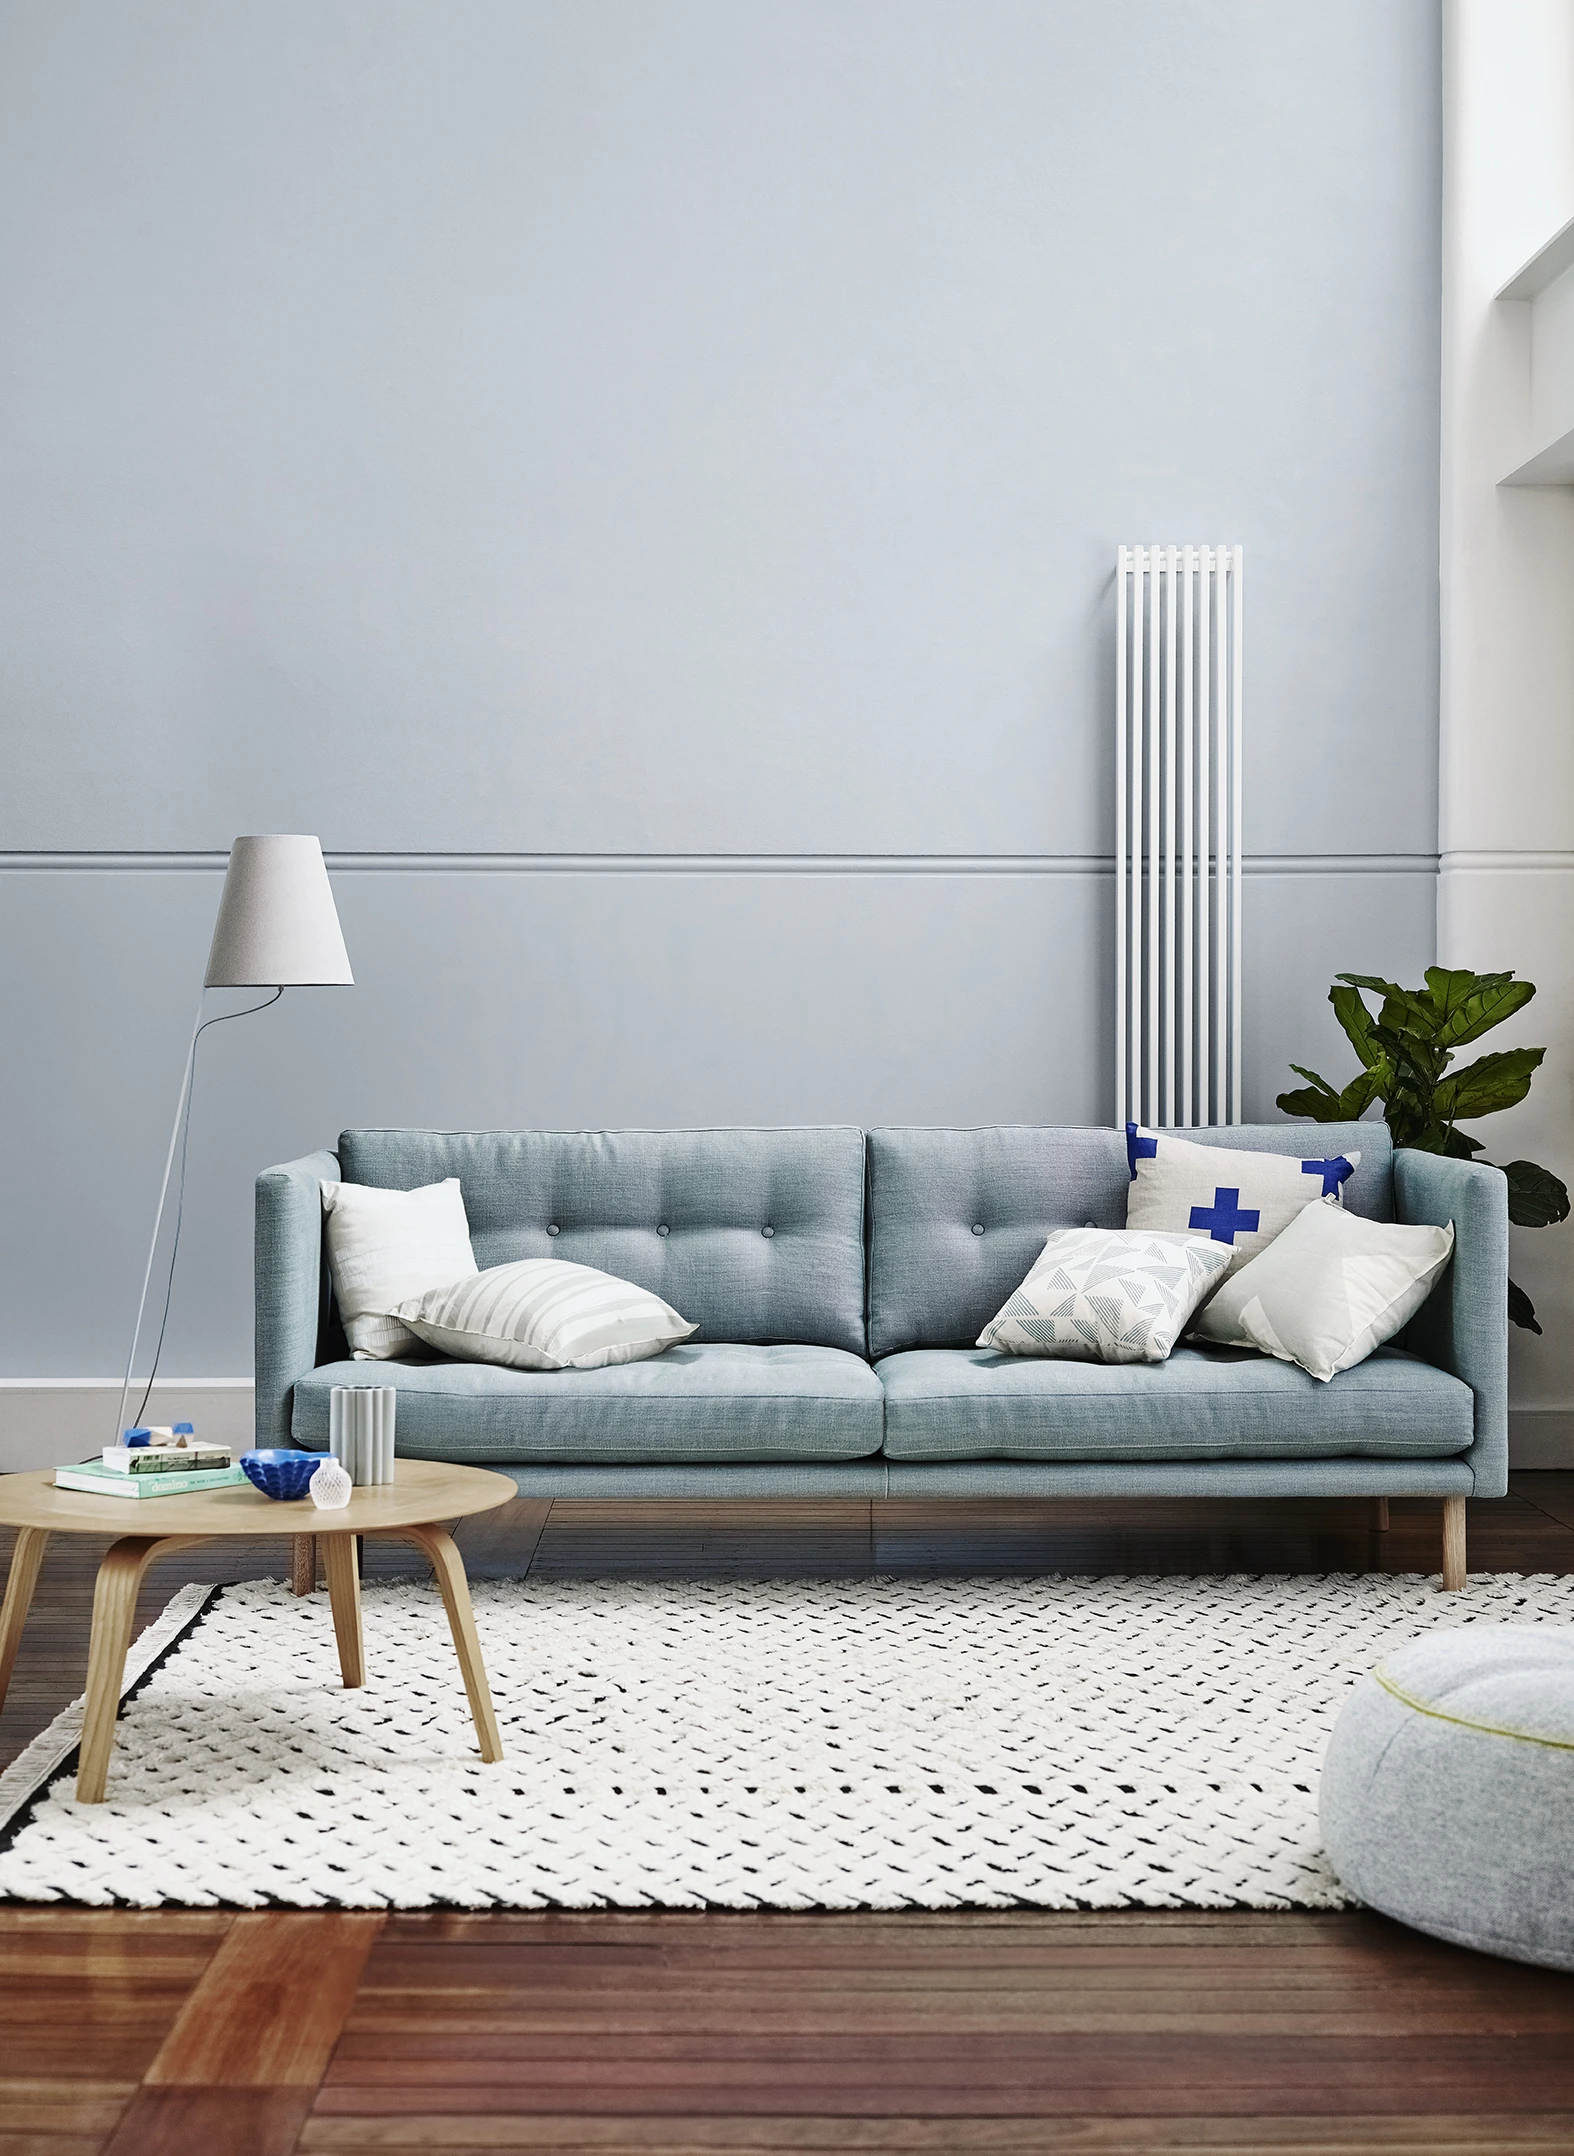 Blue couch in wooden floors with white rug in front of it and floor lamp